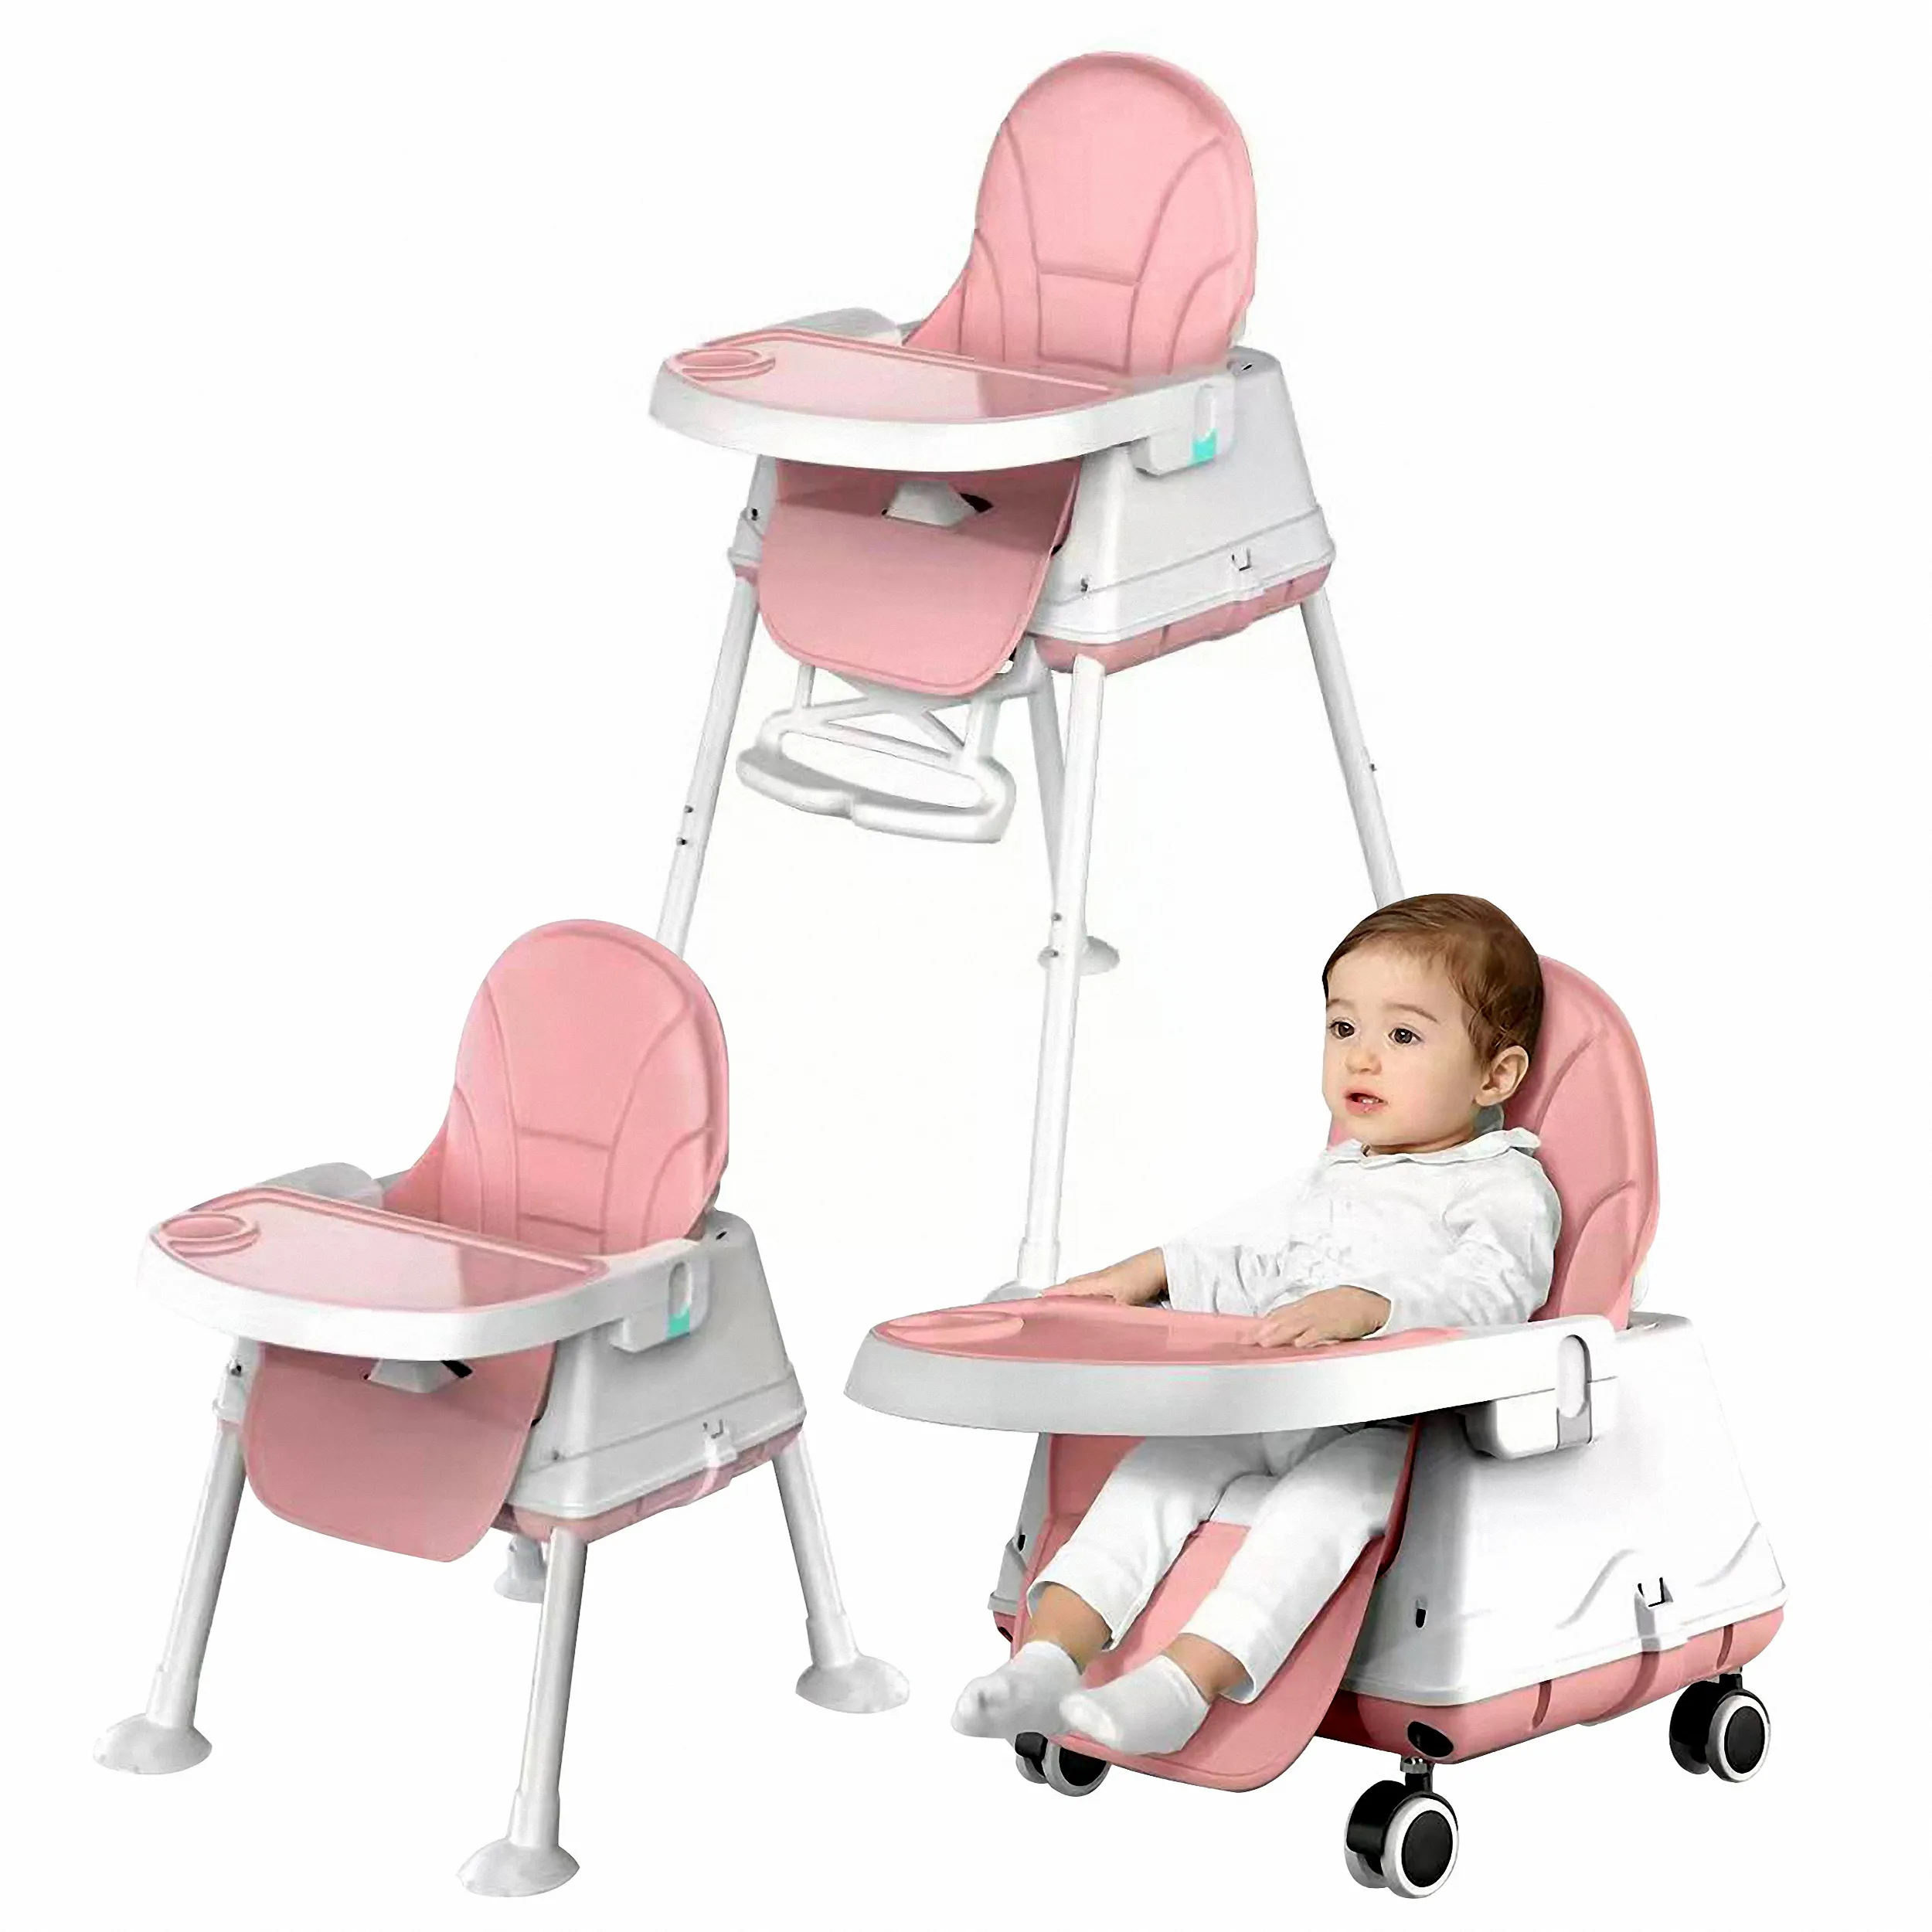 Green Sit Portable High Chair Booster Seat Baby Dining Chair Toddler for Dining Table for Toddler Beach Home and Travel Chair 